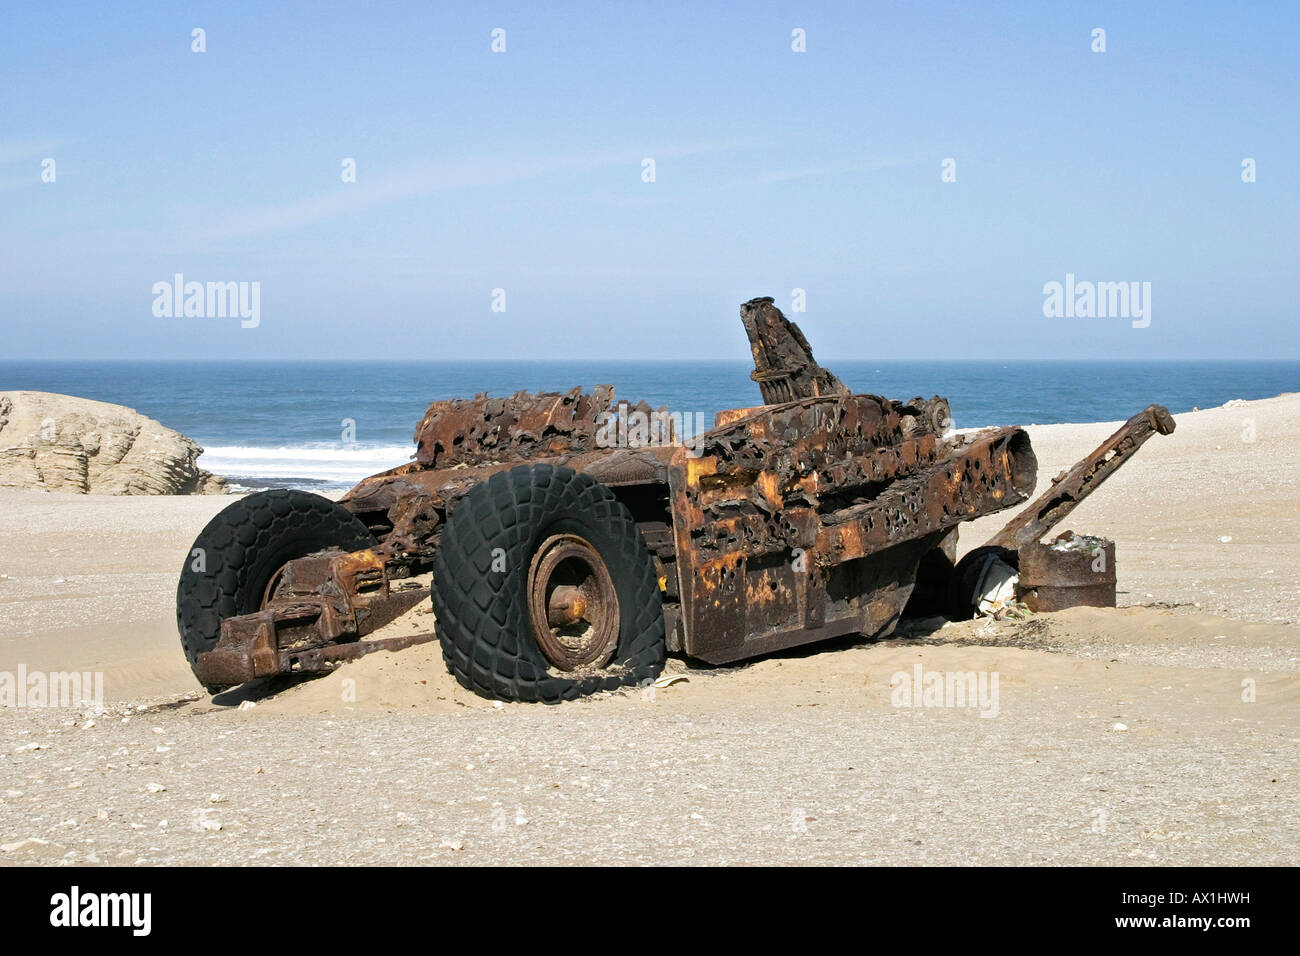 Old strong rusted vehicle for diamond searching, diamond prohibited area, Saddlehill, Atlantic Ocean, Namibia, Africa Stock Photo